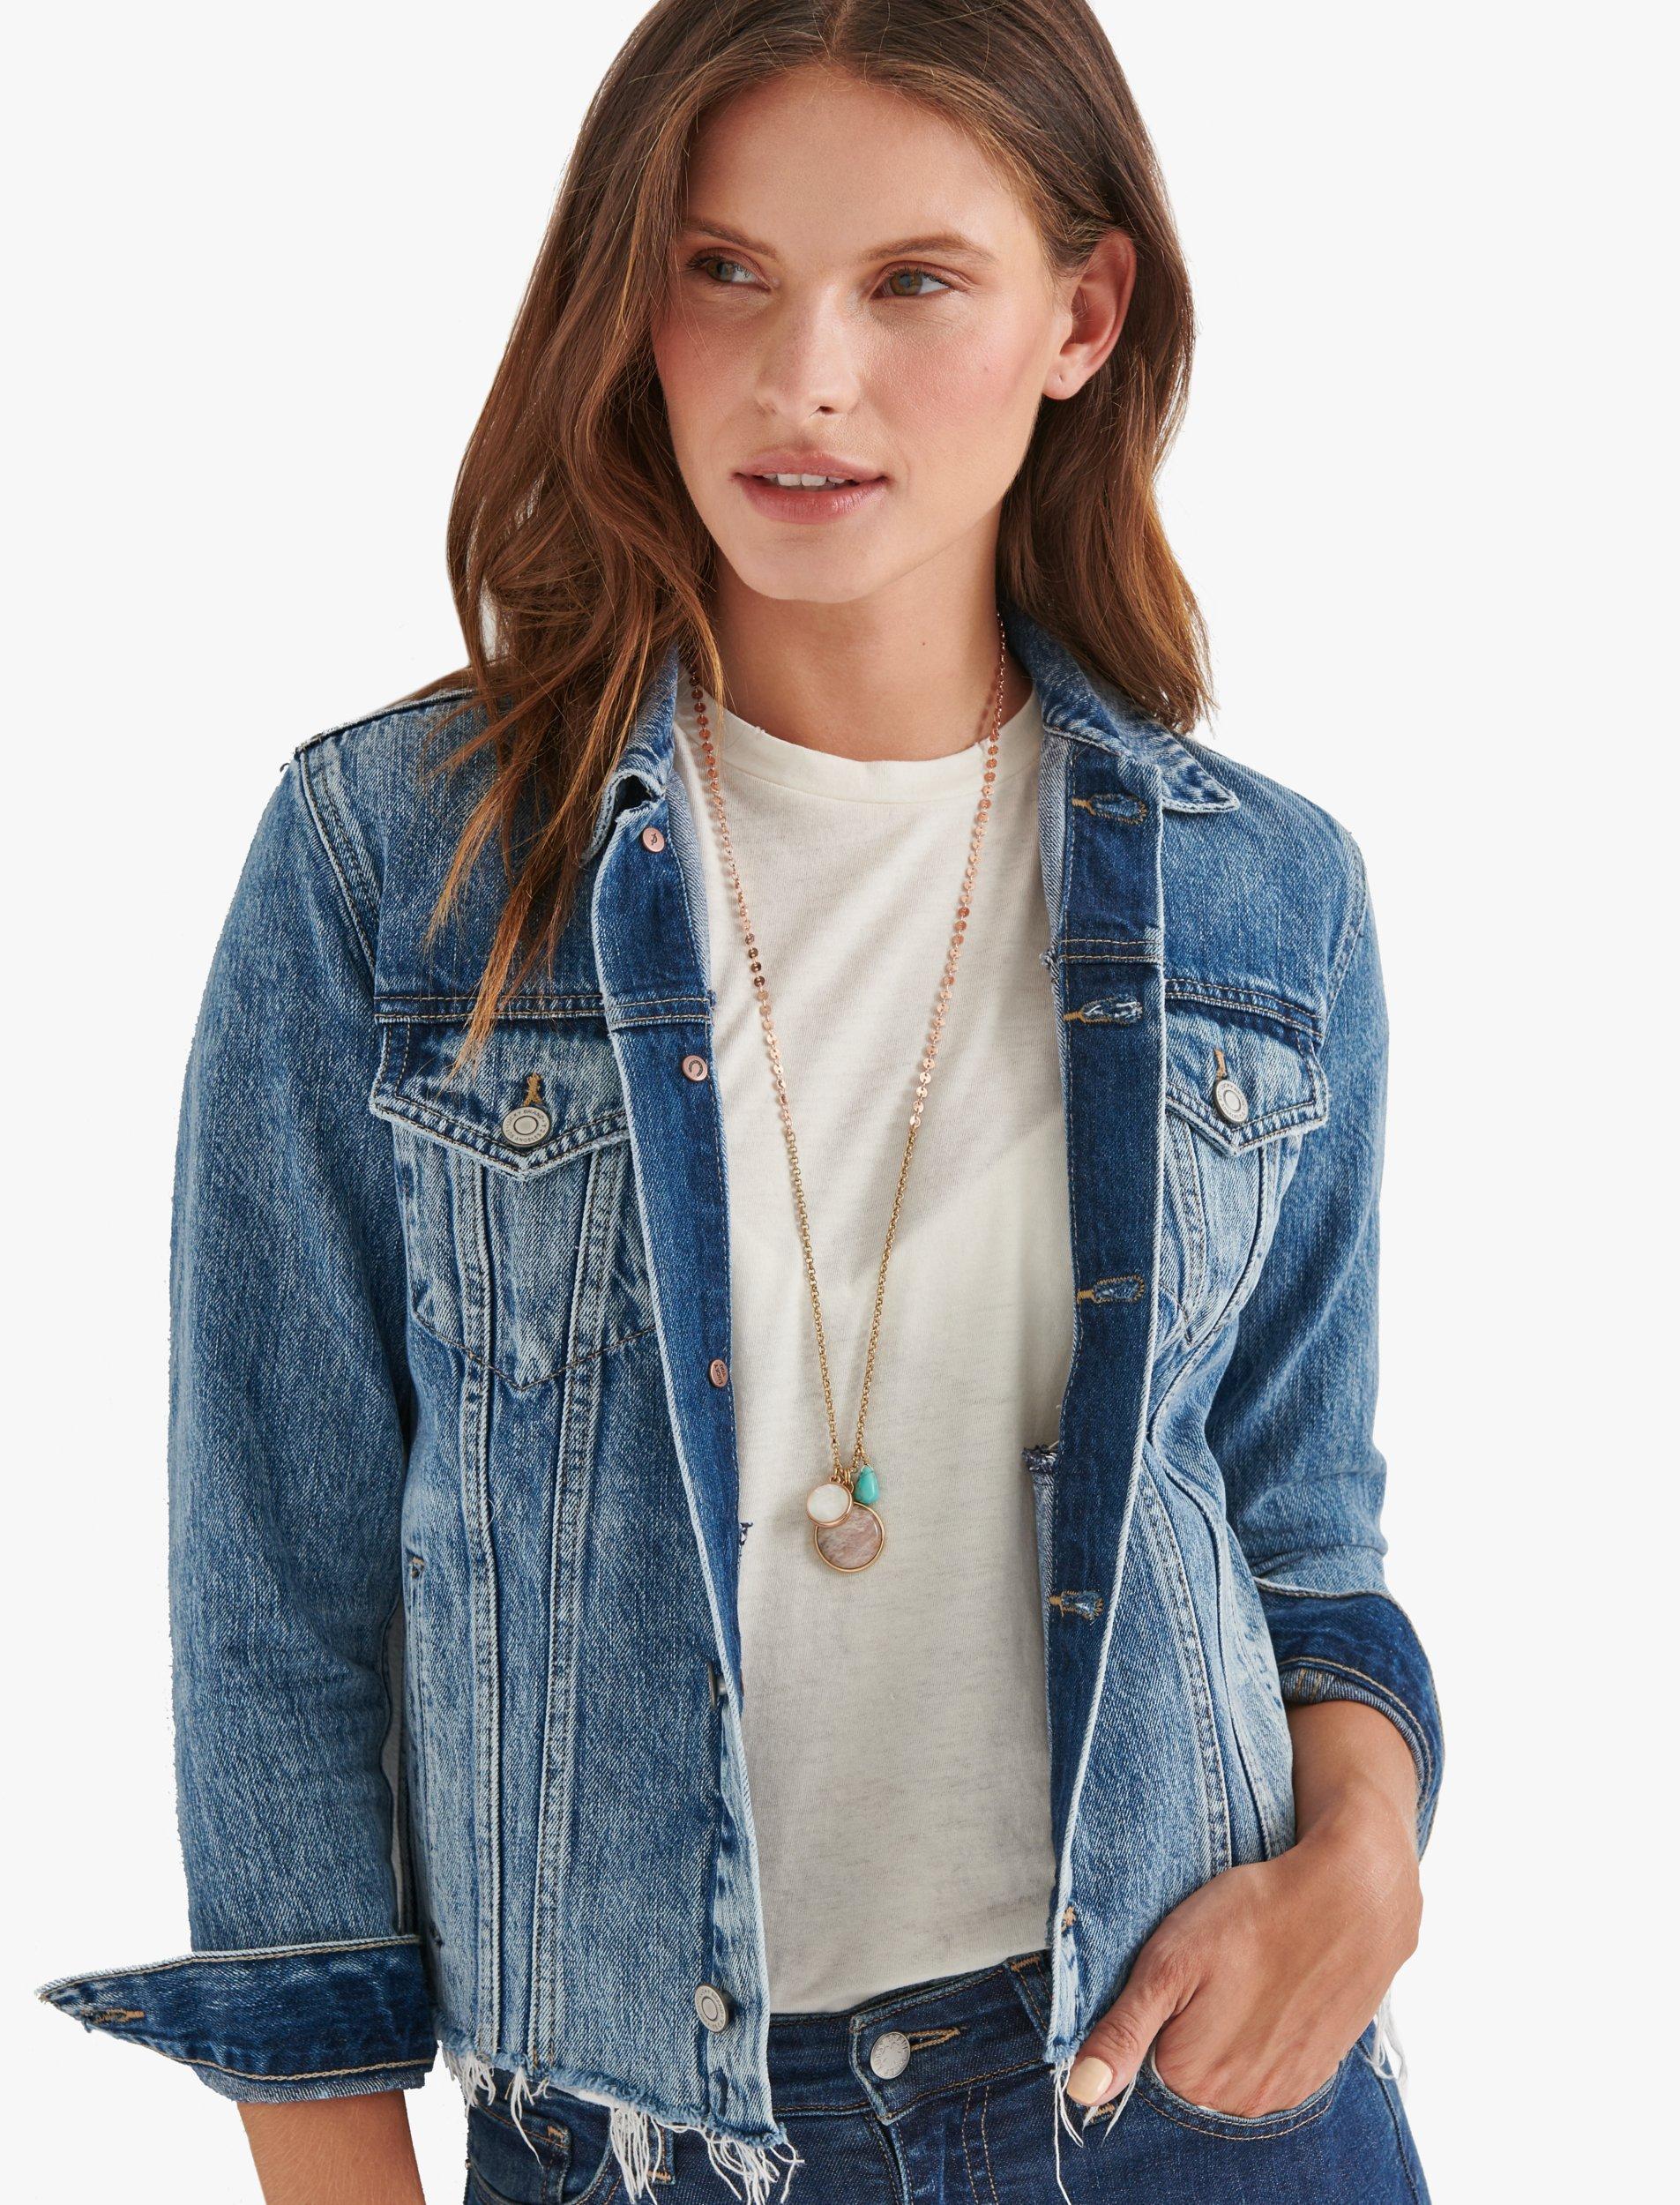 LAYER DROP NECKLACE | Lucky Brand